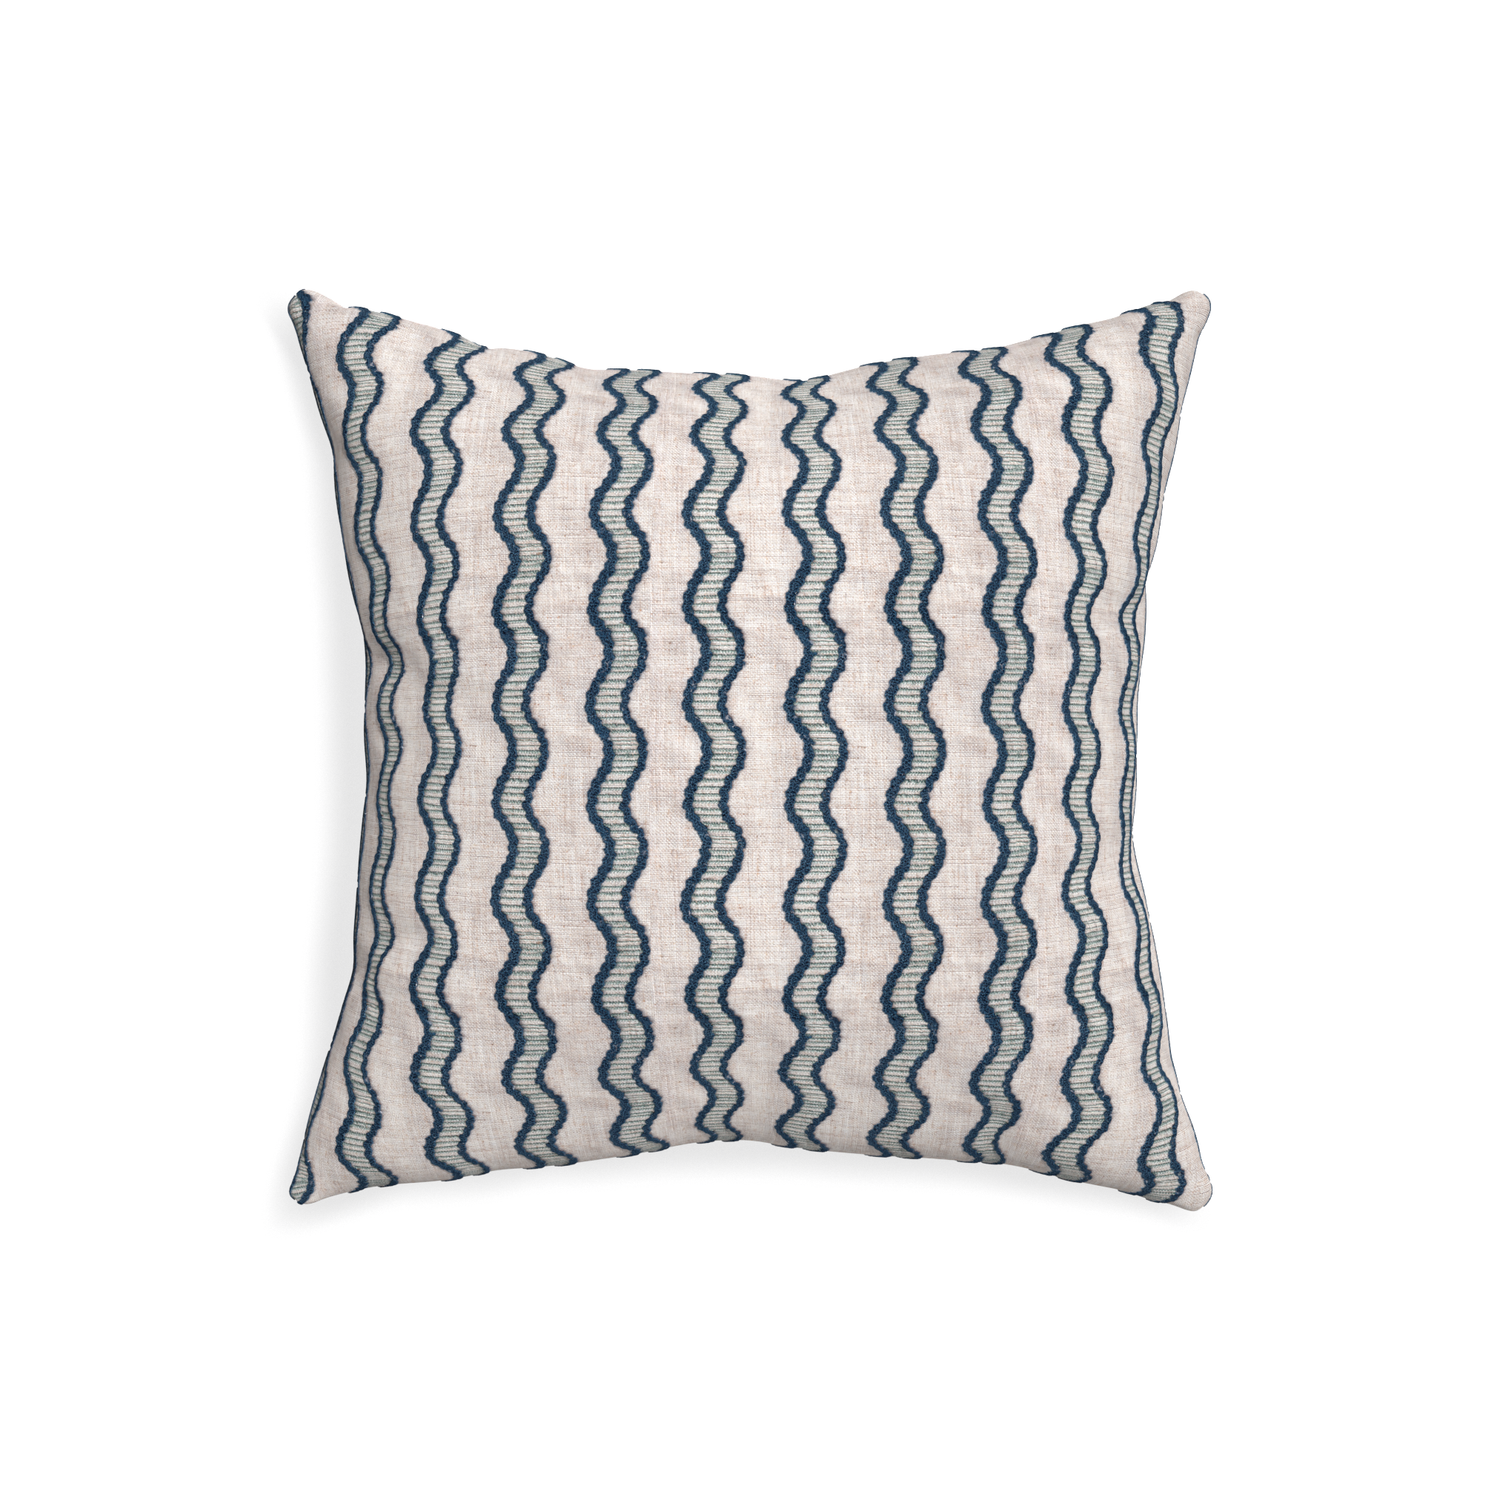 20-square beatrice custom embroidered wavepillow with none on white background